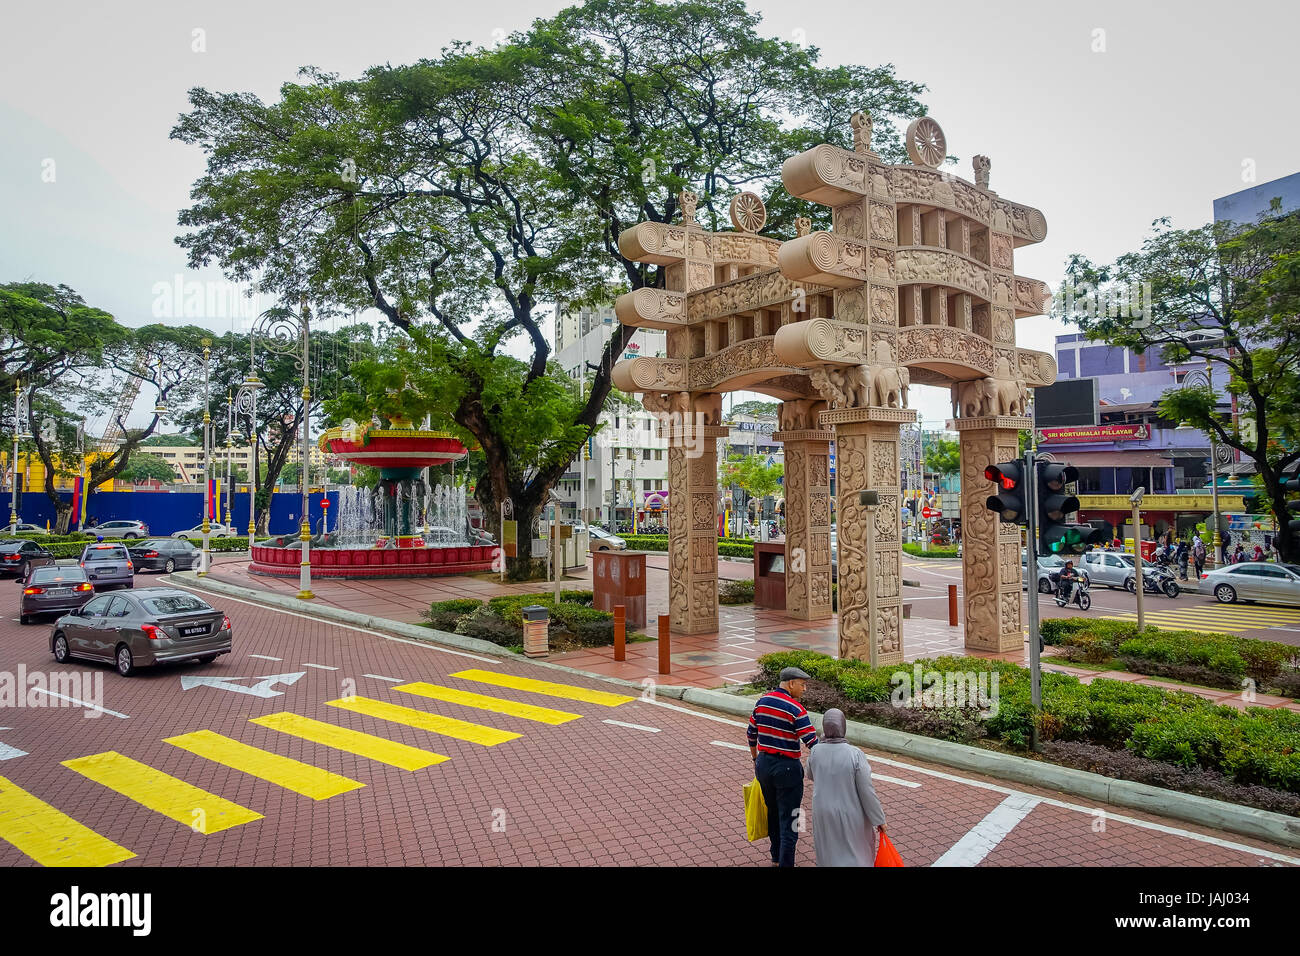 Kuala Lumpur, Malaysia - March 9, 2017: Little India neighborhood was recently transformed into a wide street with Indian stores and restaurants run by the country’s Indian community. Stock Photo